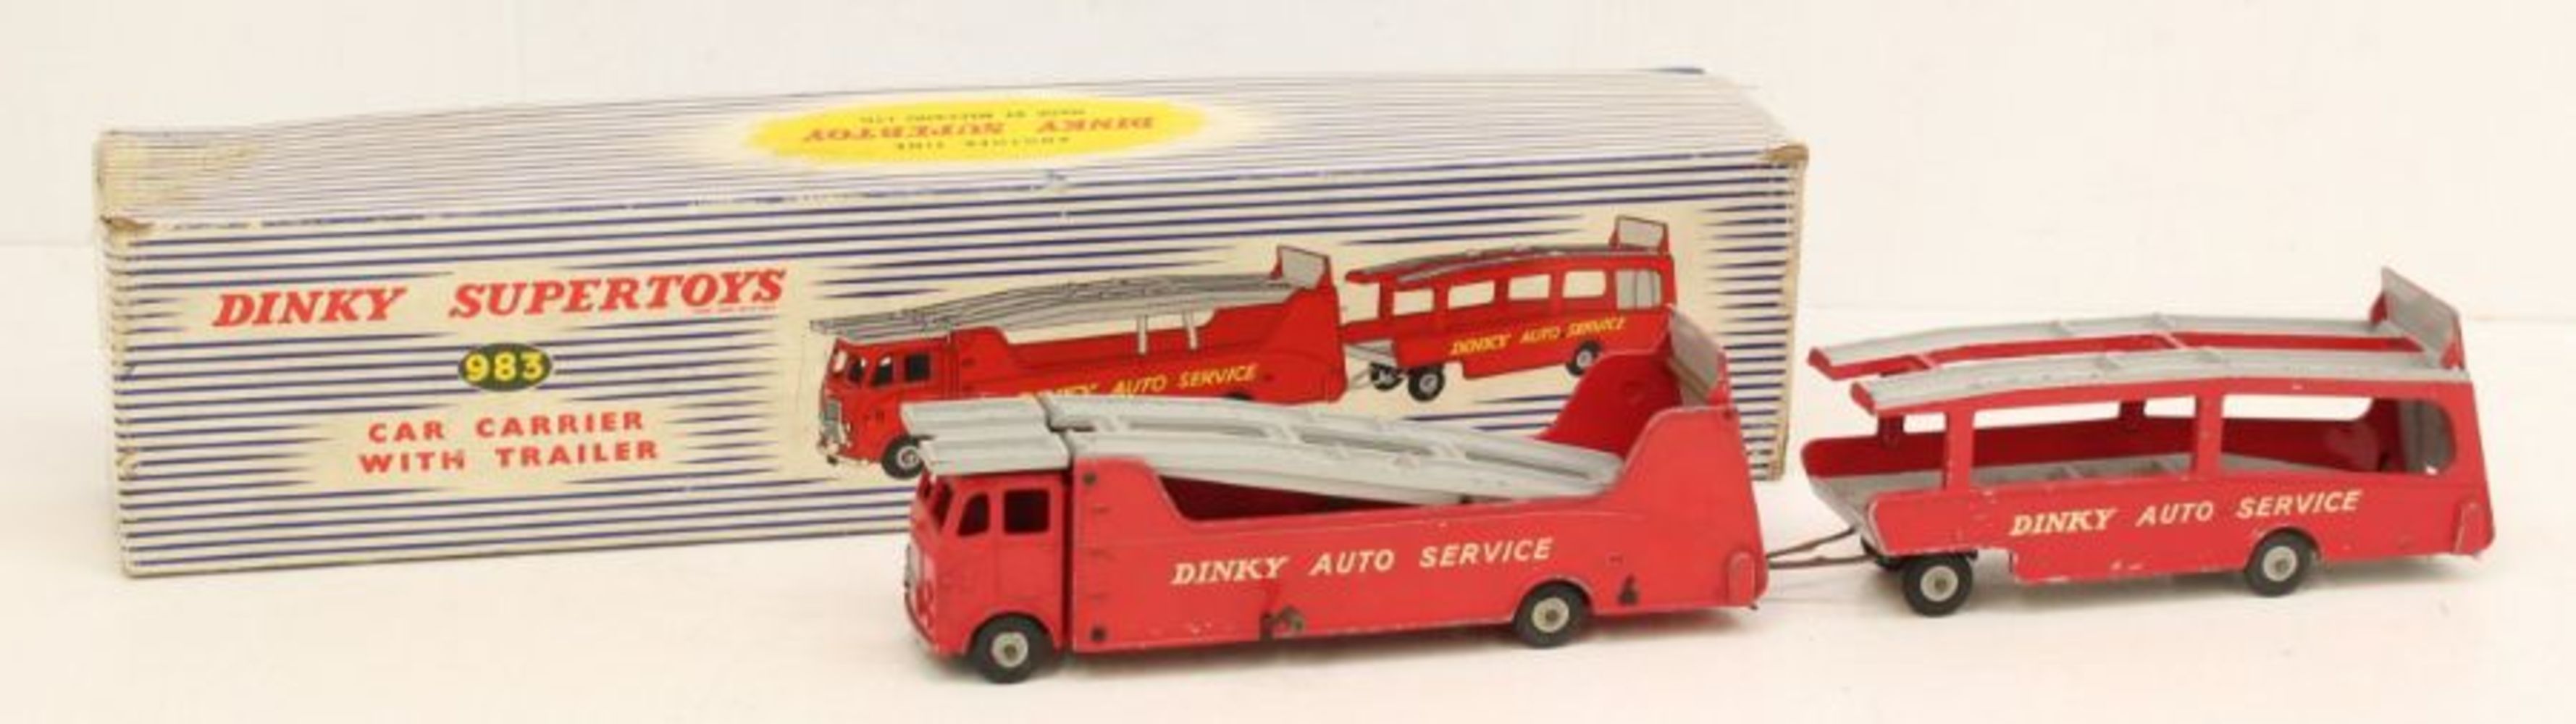 April Specialist Toys, Models, Live Steam & Video Games Auction - Viewing by Appointment - Webcast Only - Postage and Safe Click/Collect Only